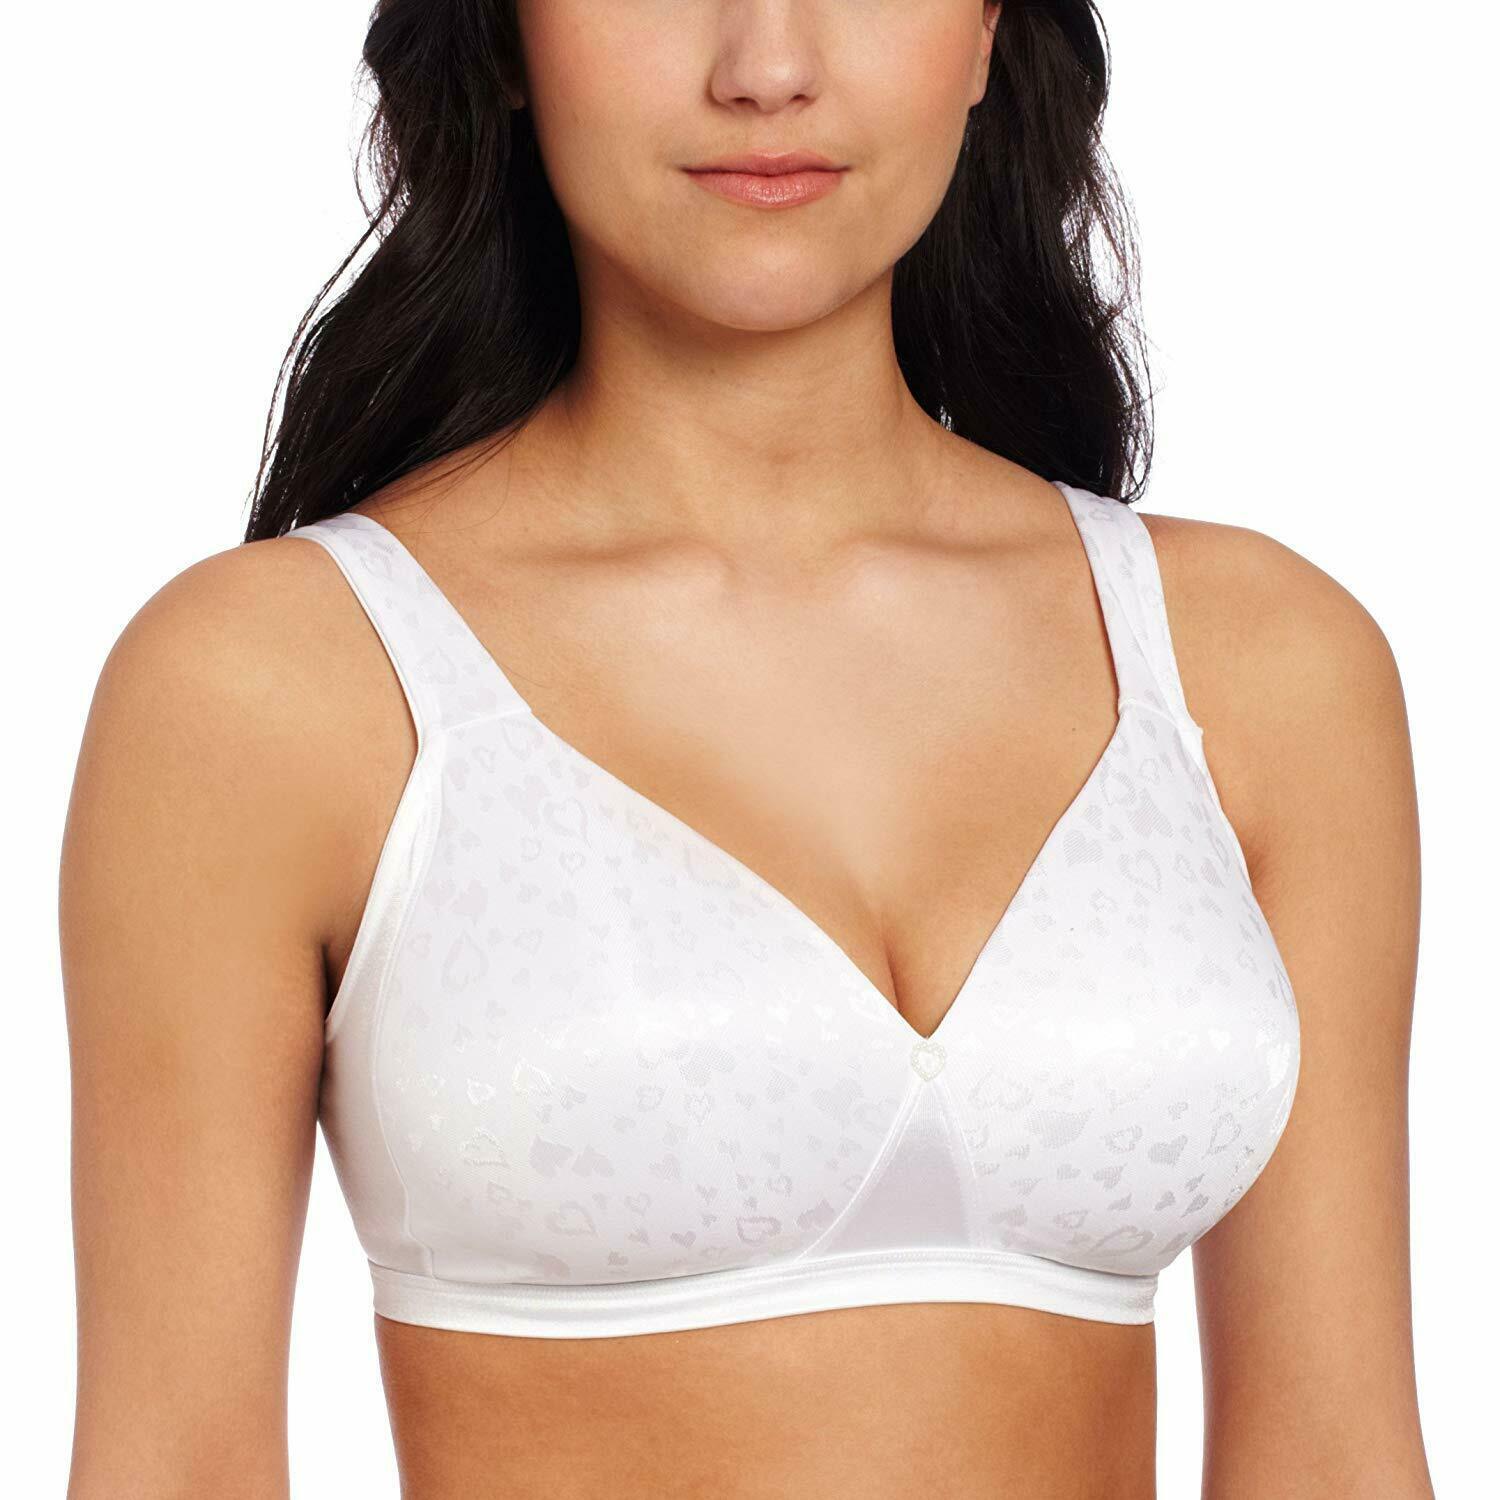 Playtex WHITE Cross Your Heart Lightly Lined Soft Cup Bra US C UK C Bras Bra Sets